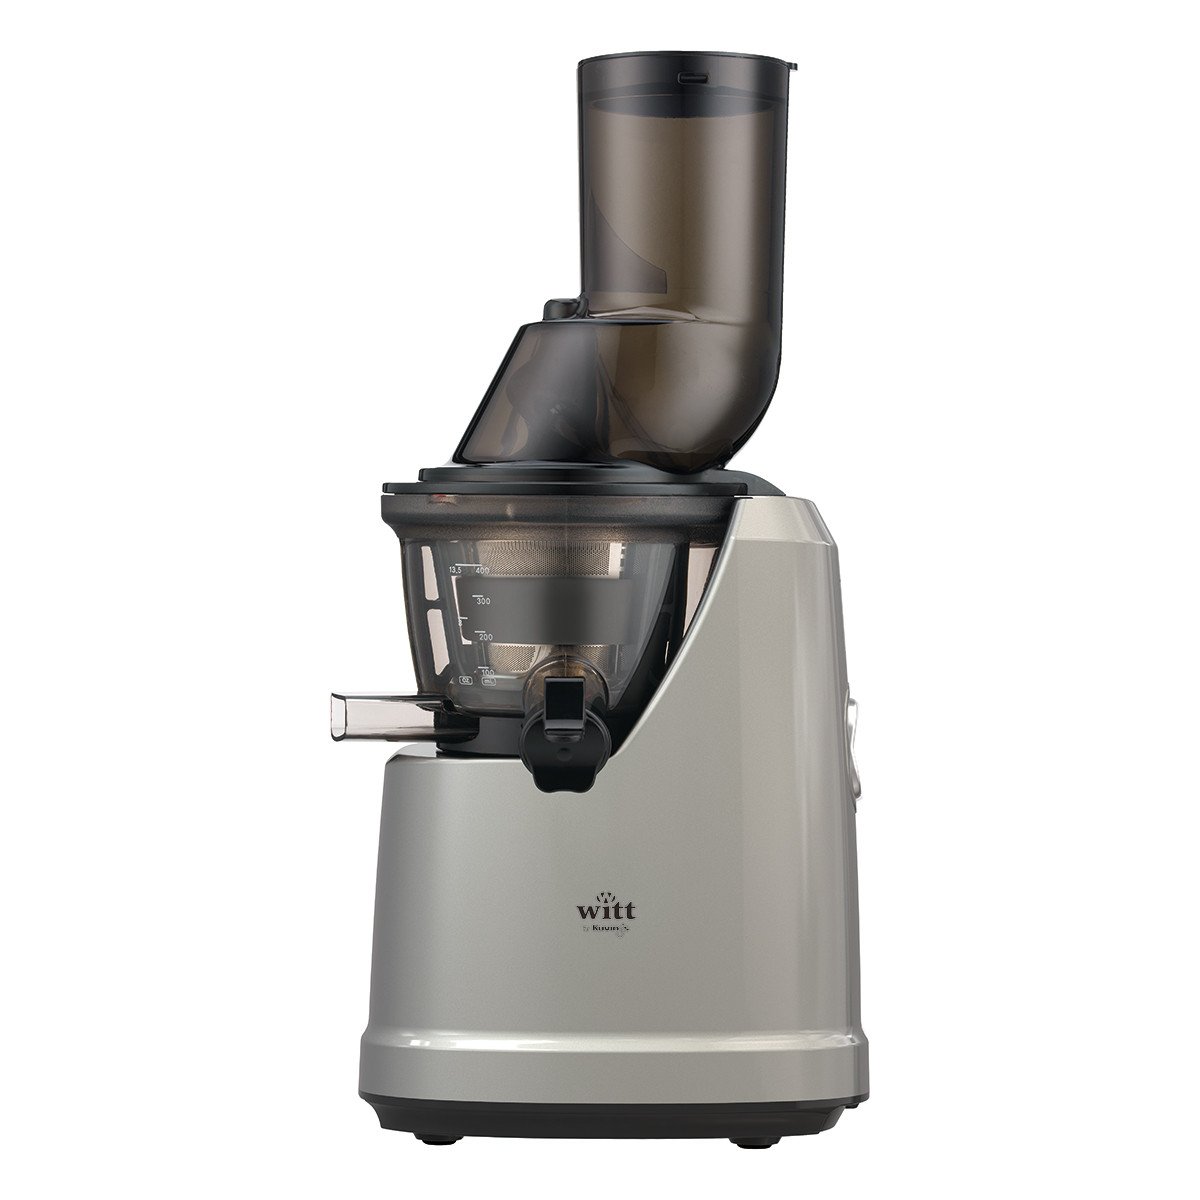 Witt By Kuvings C9640DG Whole Slowjuicer